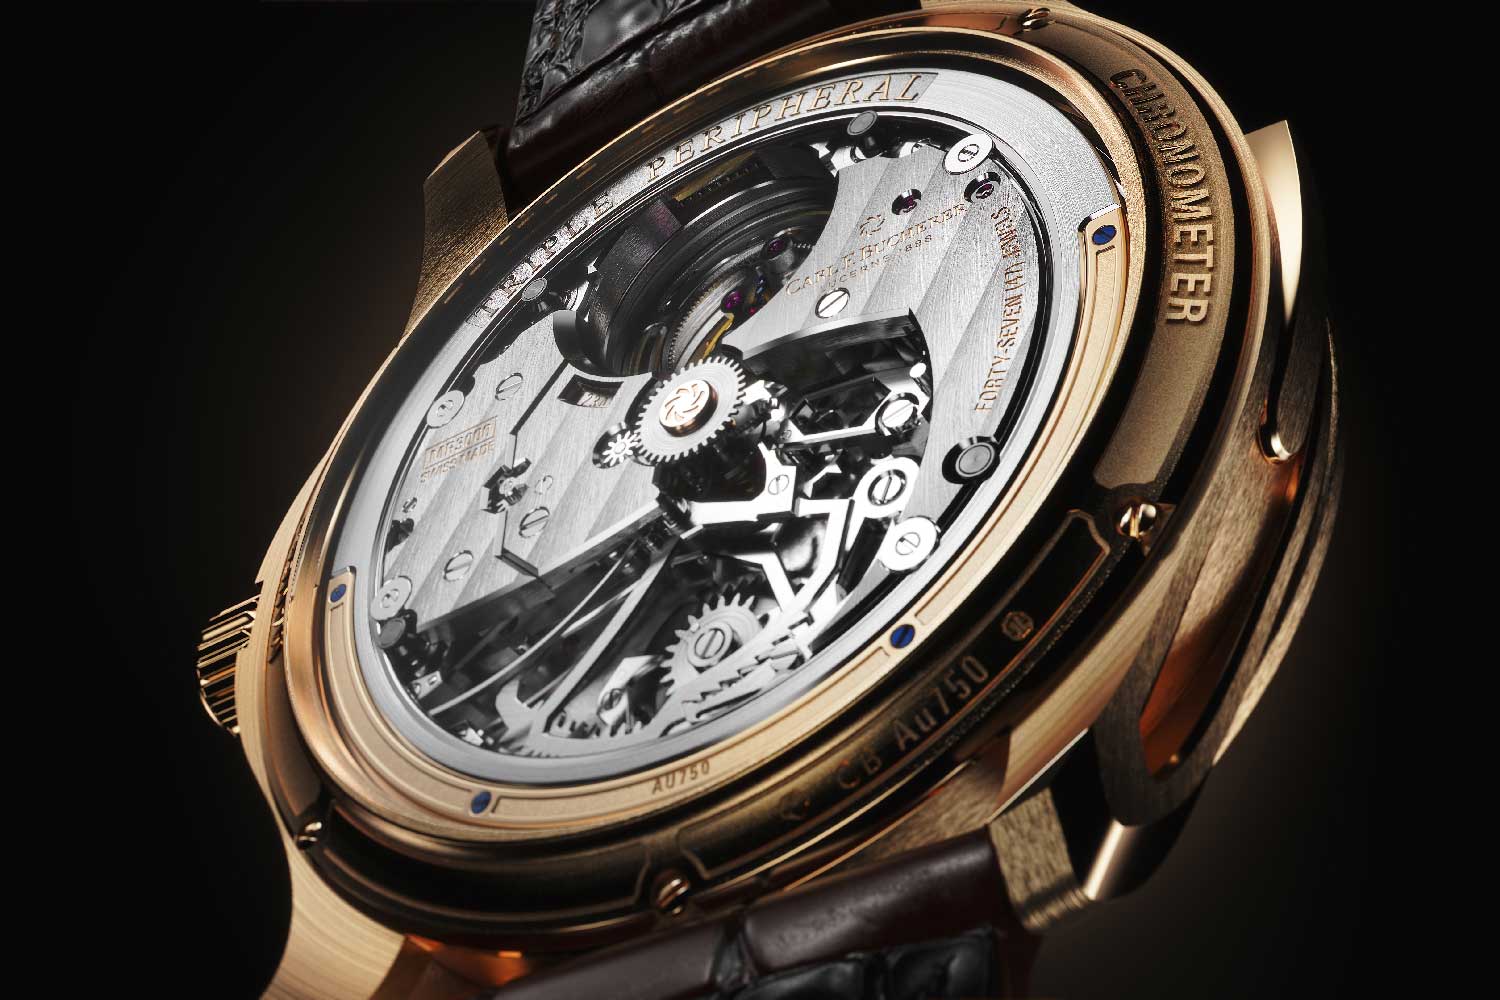 Introduced at Watches and Wonders 2021, the Manero Minute Repeater Symphony boasts not only Carl F. Bucherer’s Peripheral Winding System and floating Peripheral Tourbillon but also a third peripheral mechanism, the watch’s COSC certified Calibre CFB MR3000 is “Triple Peripheral”.